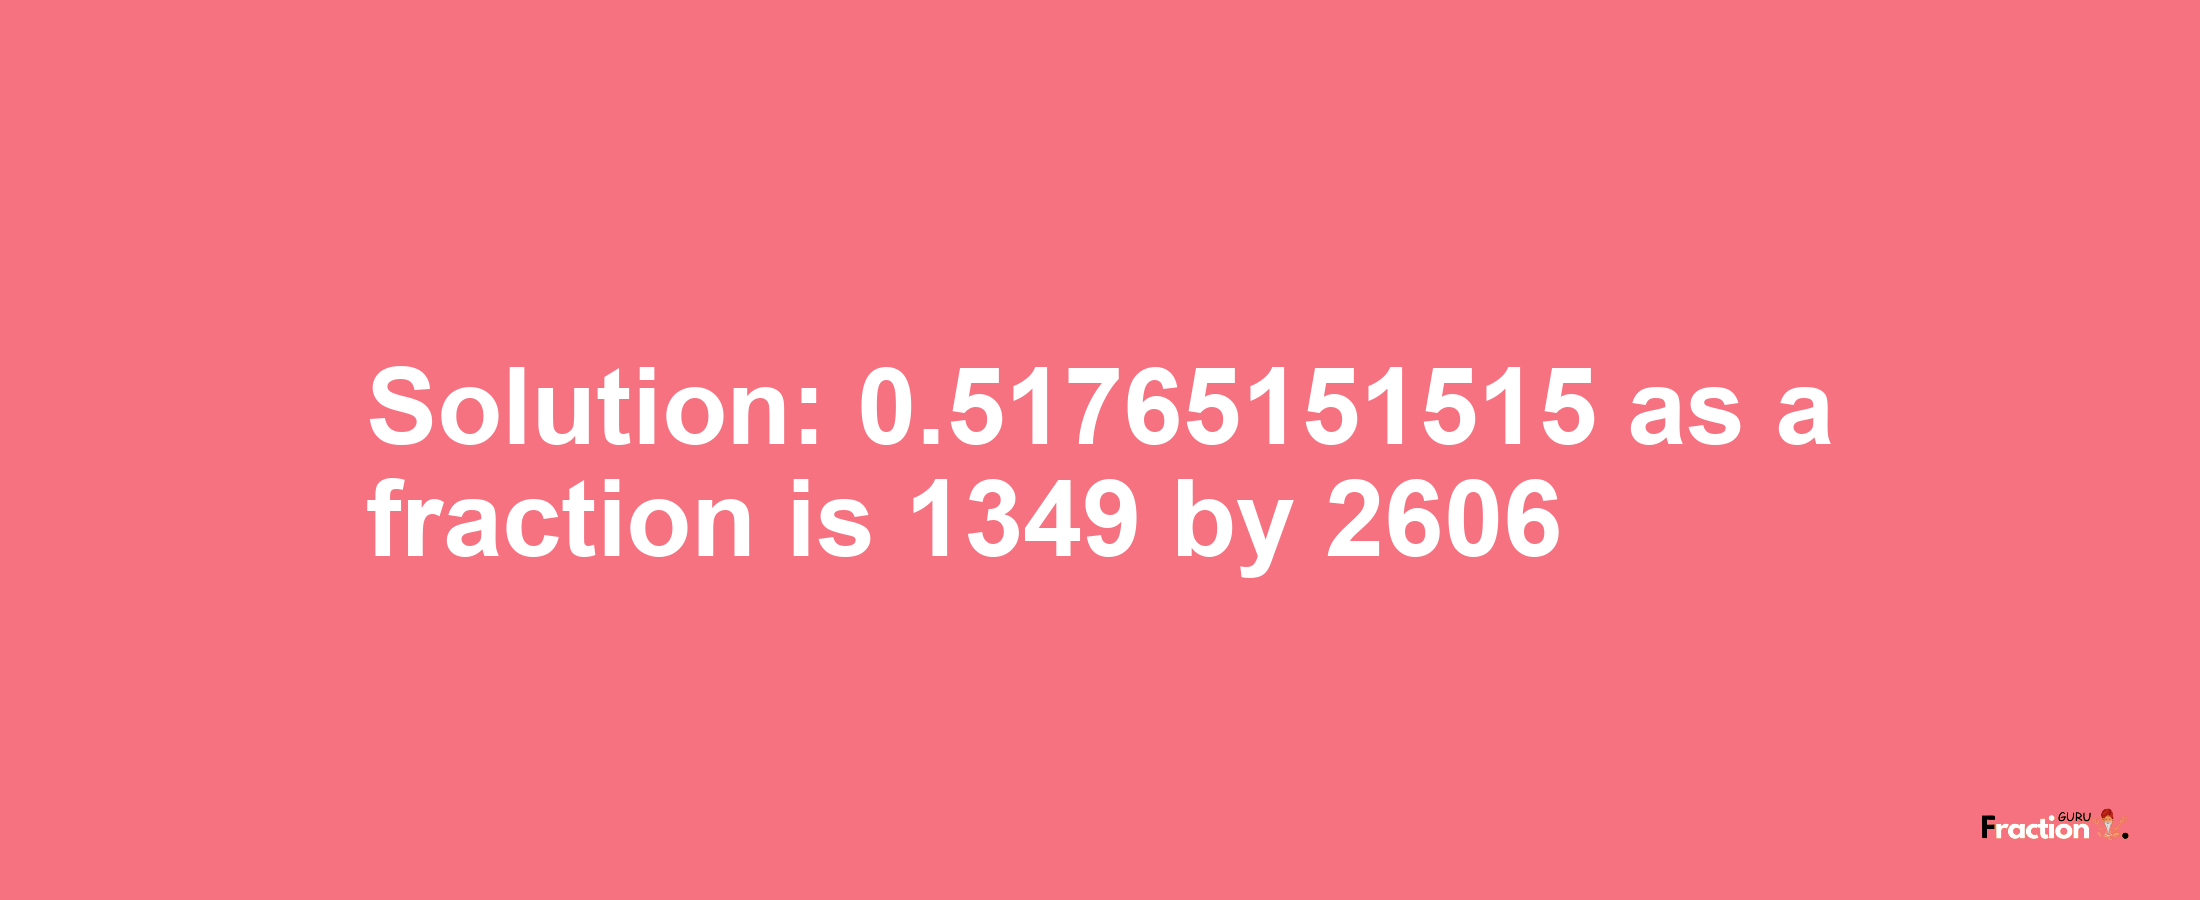 Solution:0.51765151515 as a fraction is 1349/2606